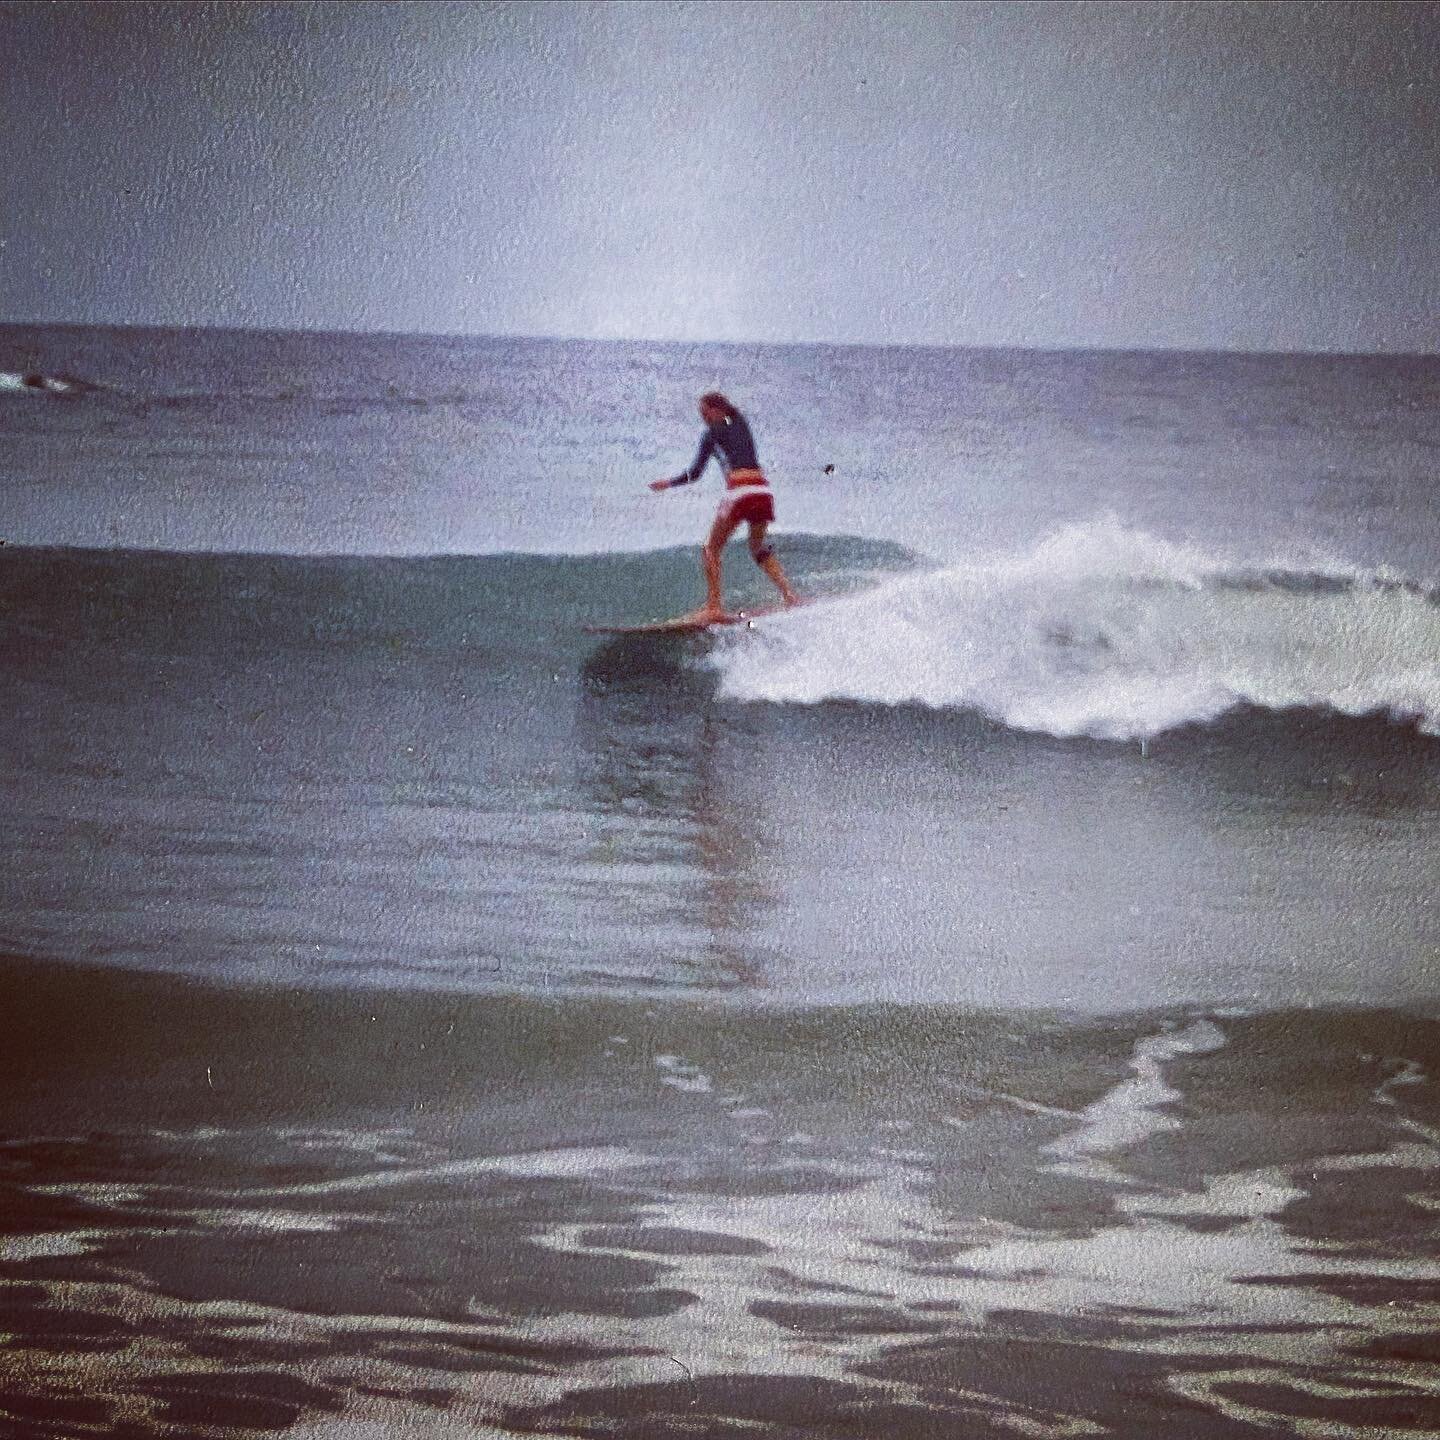 Flash back to those lazy, hazy, wave-chasing days of my well-spent youth #sigh #surfing #longboarding #beachlife #lifeisabeachbeforekids